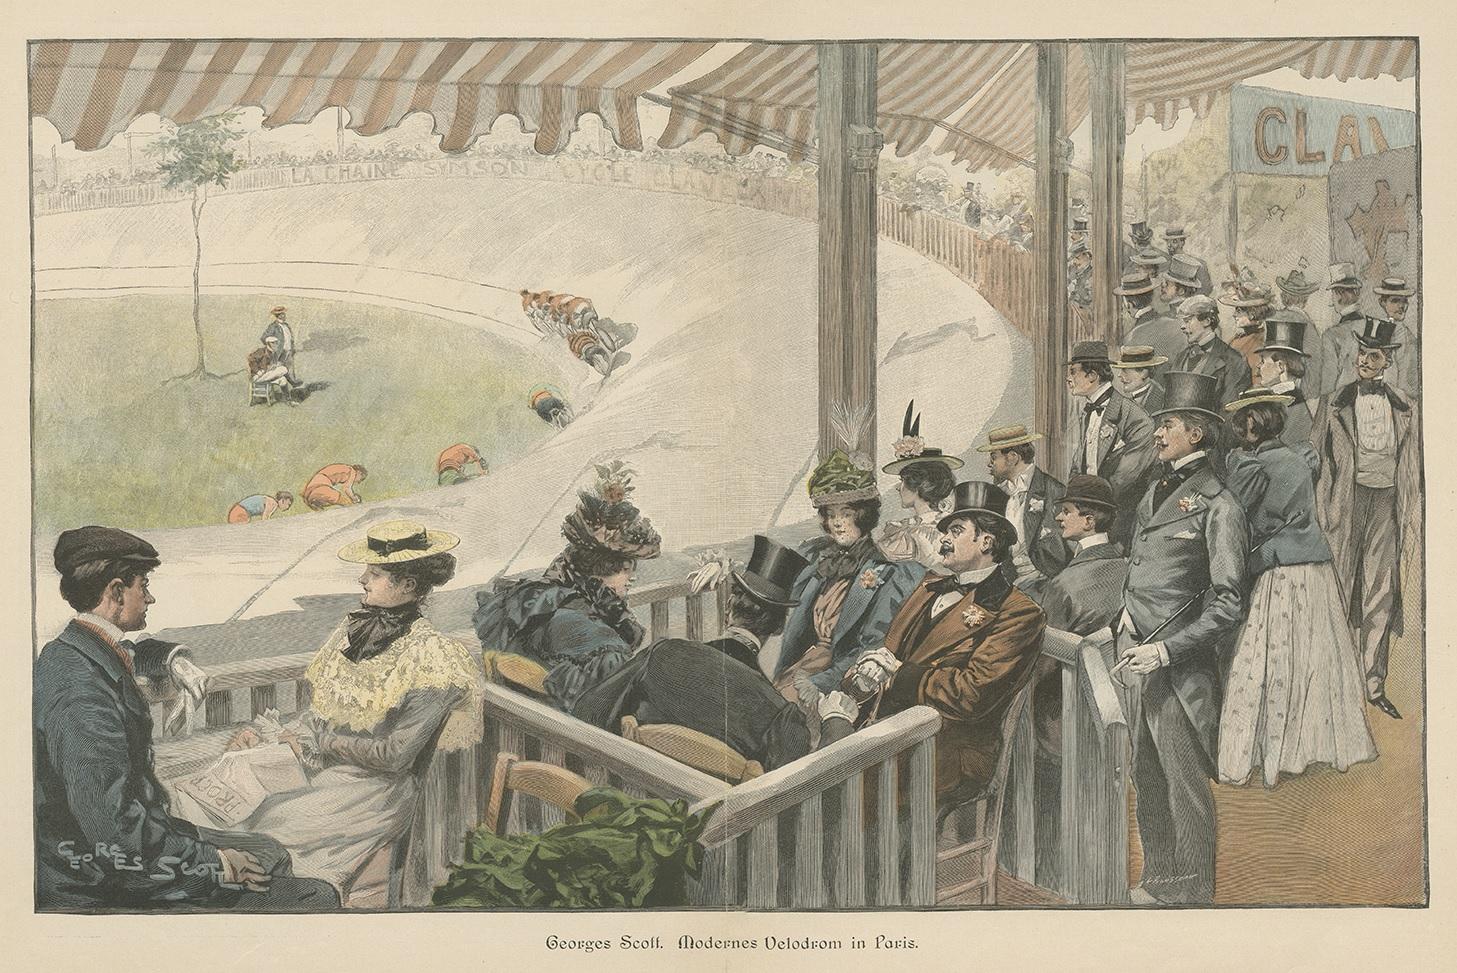 Antique print titled 'Georges Scott. Modernes Velodrom in Paris'. Wood engraving of a bicycle racing scene made after Georges Scott. Originates from a German magazine/journal titled 'Moderne Kunst'. German text and images on verso.